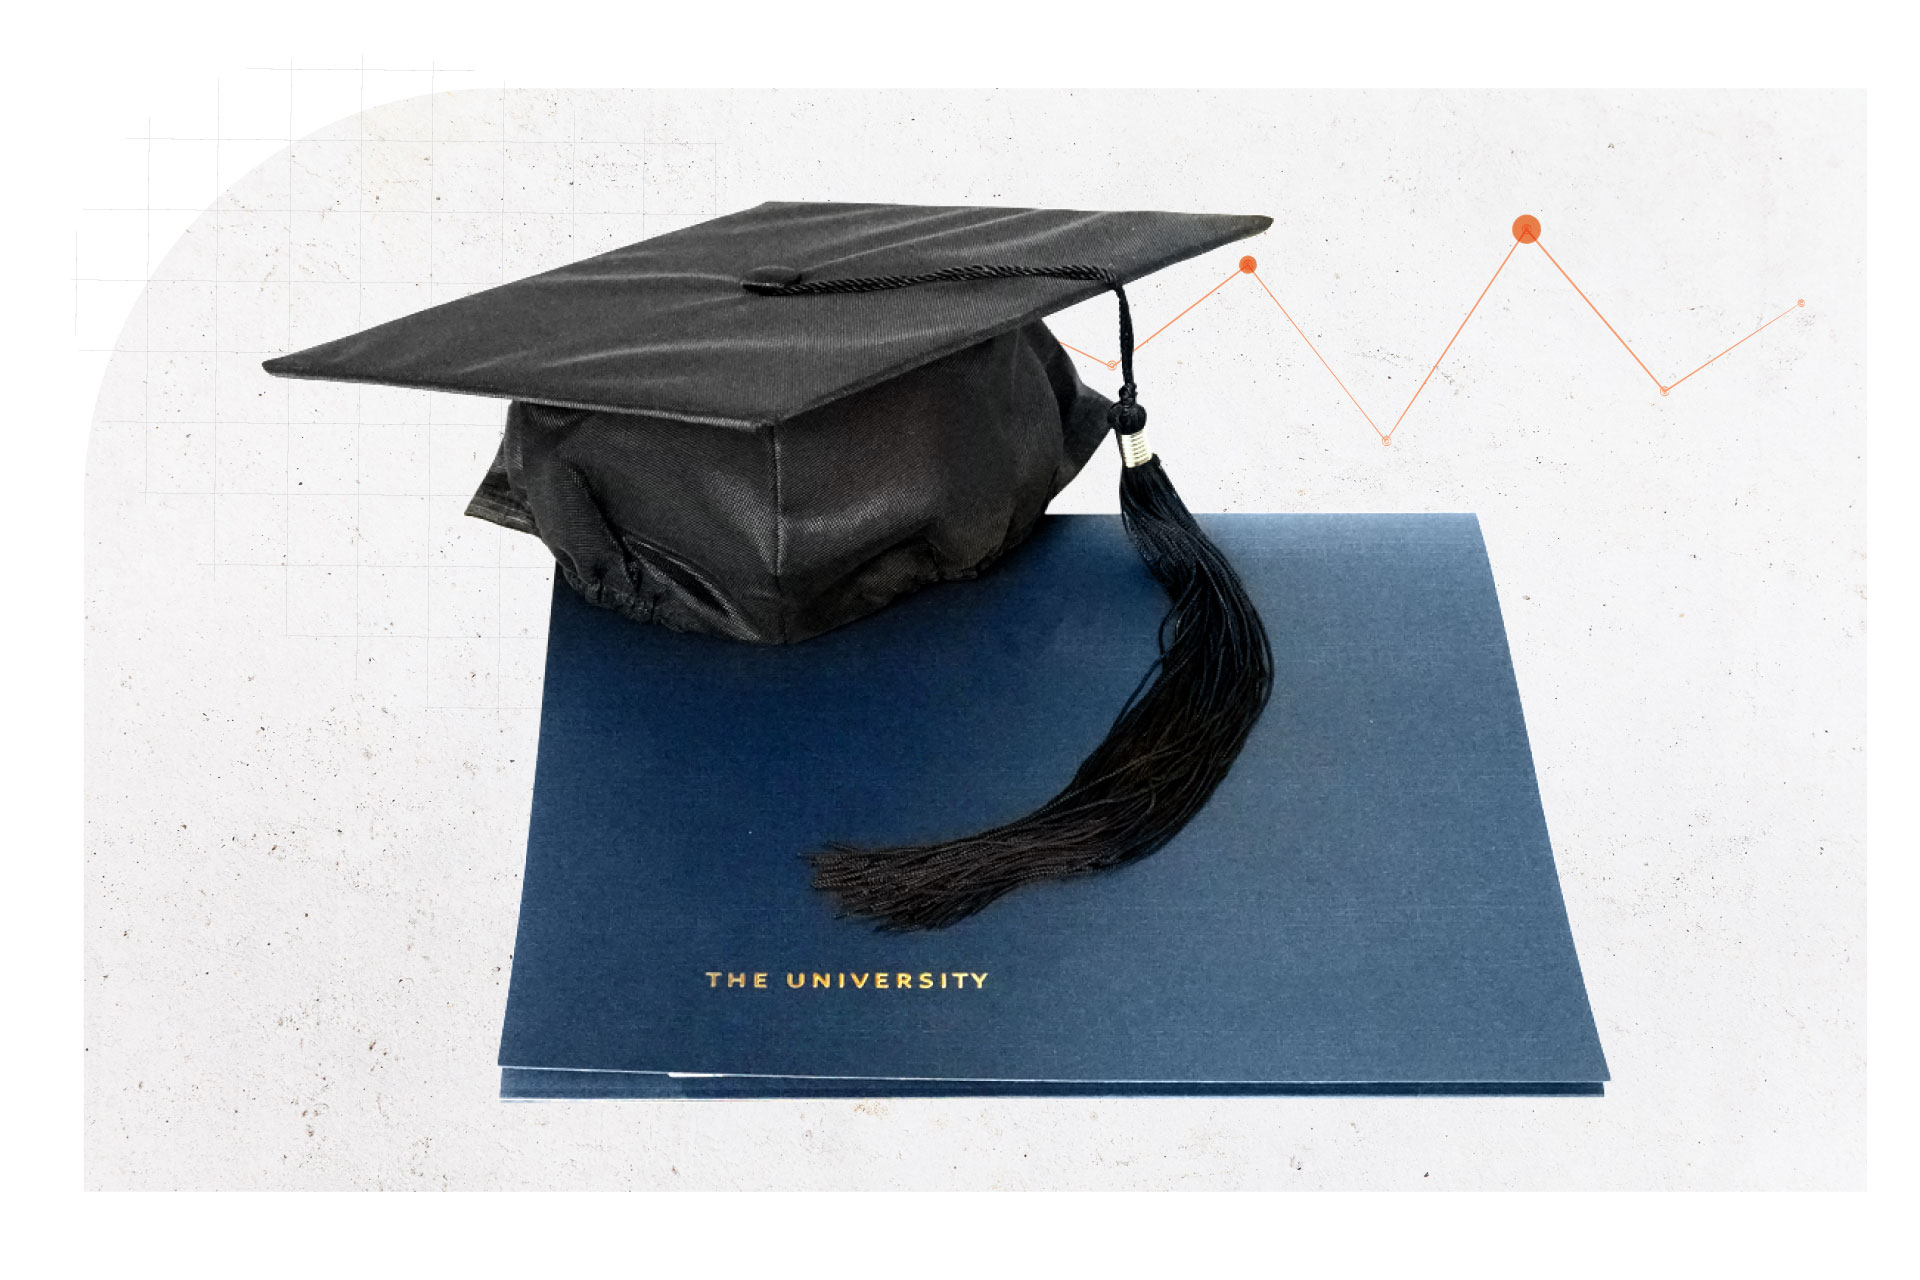 A graduation cap sitting on top of a blue file folder with The University labelled across the front. The file folder was presumbly hold a diploma in it. The background has graph lines and data points in it.